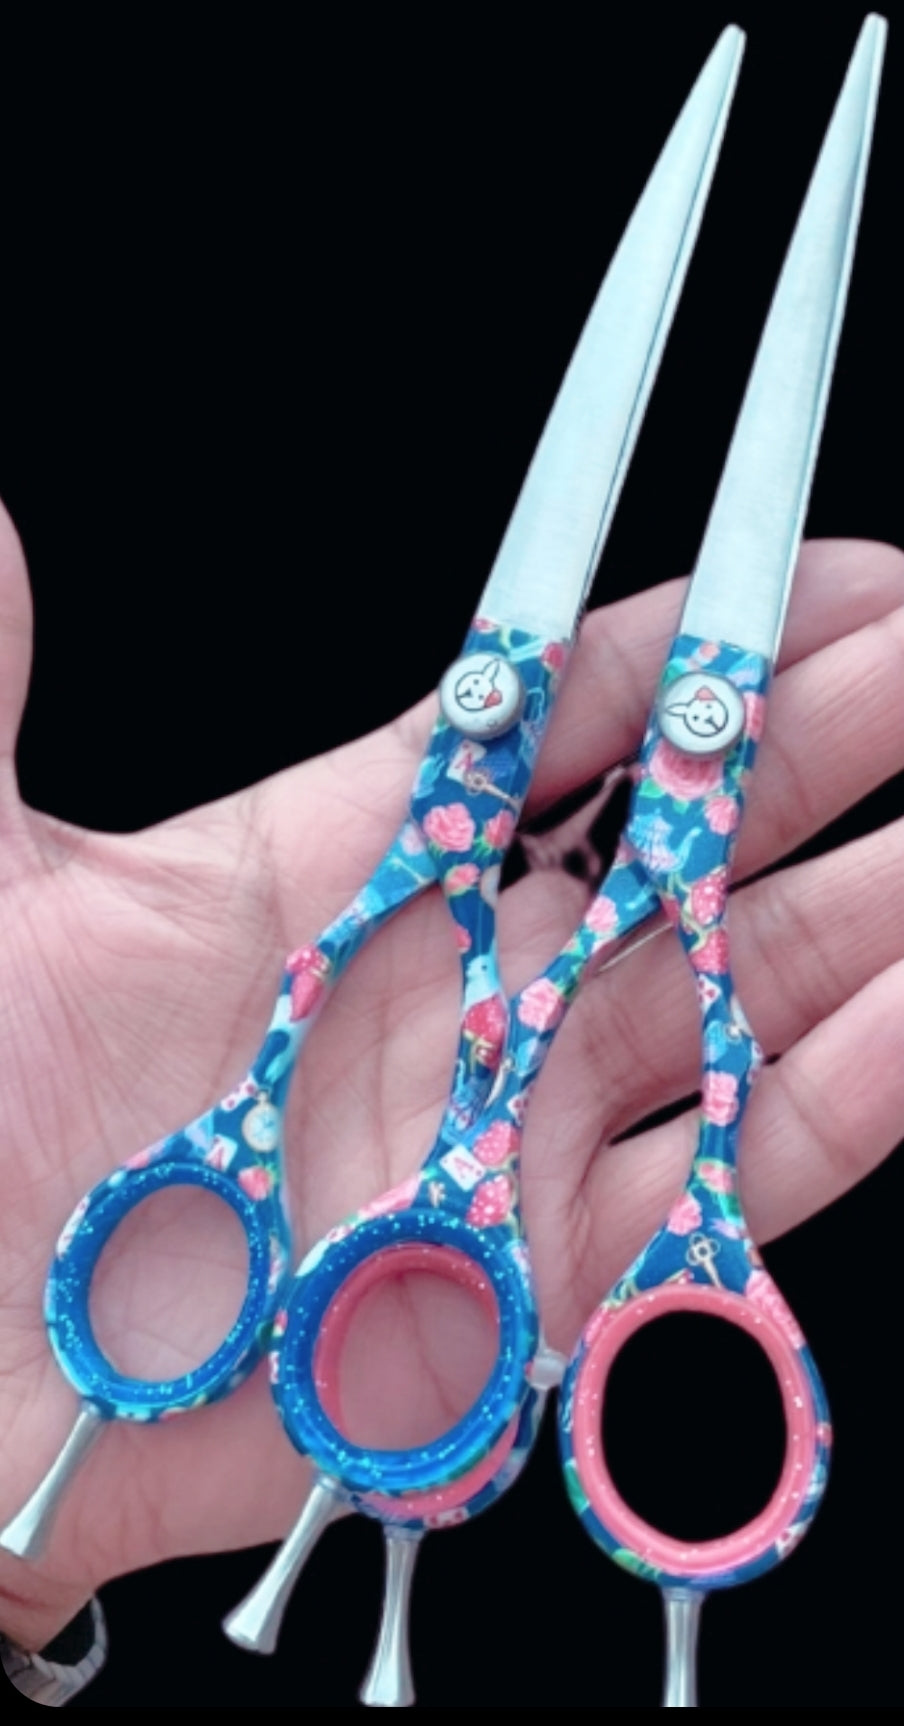 Loyalty Pet Products “Wonderland ” 2 pc Shear Set With Matching Shear Case + Gift